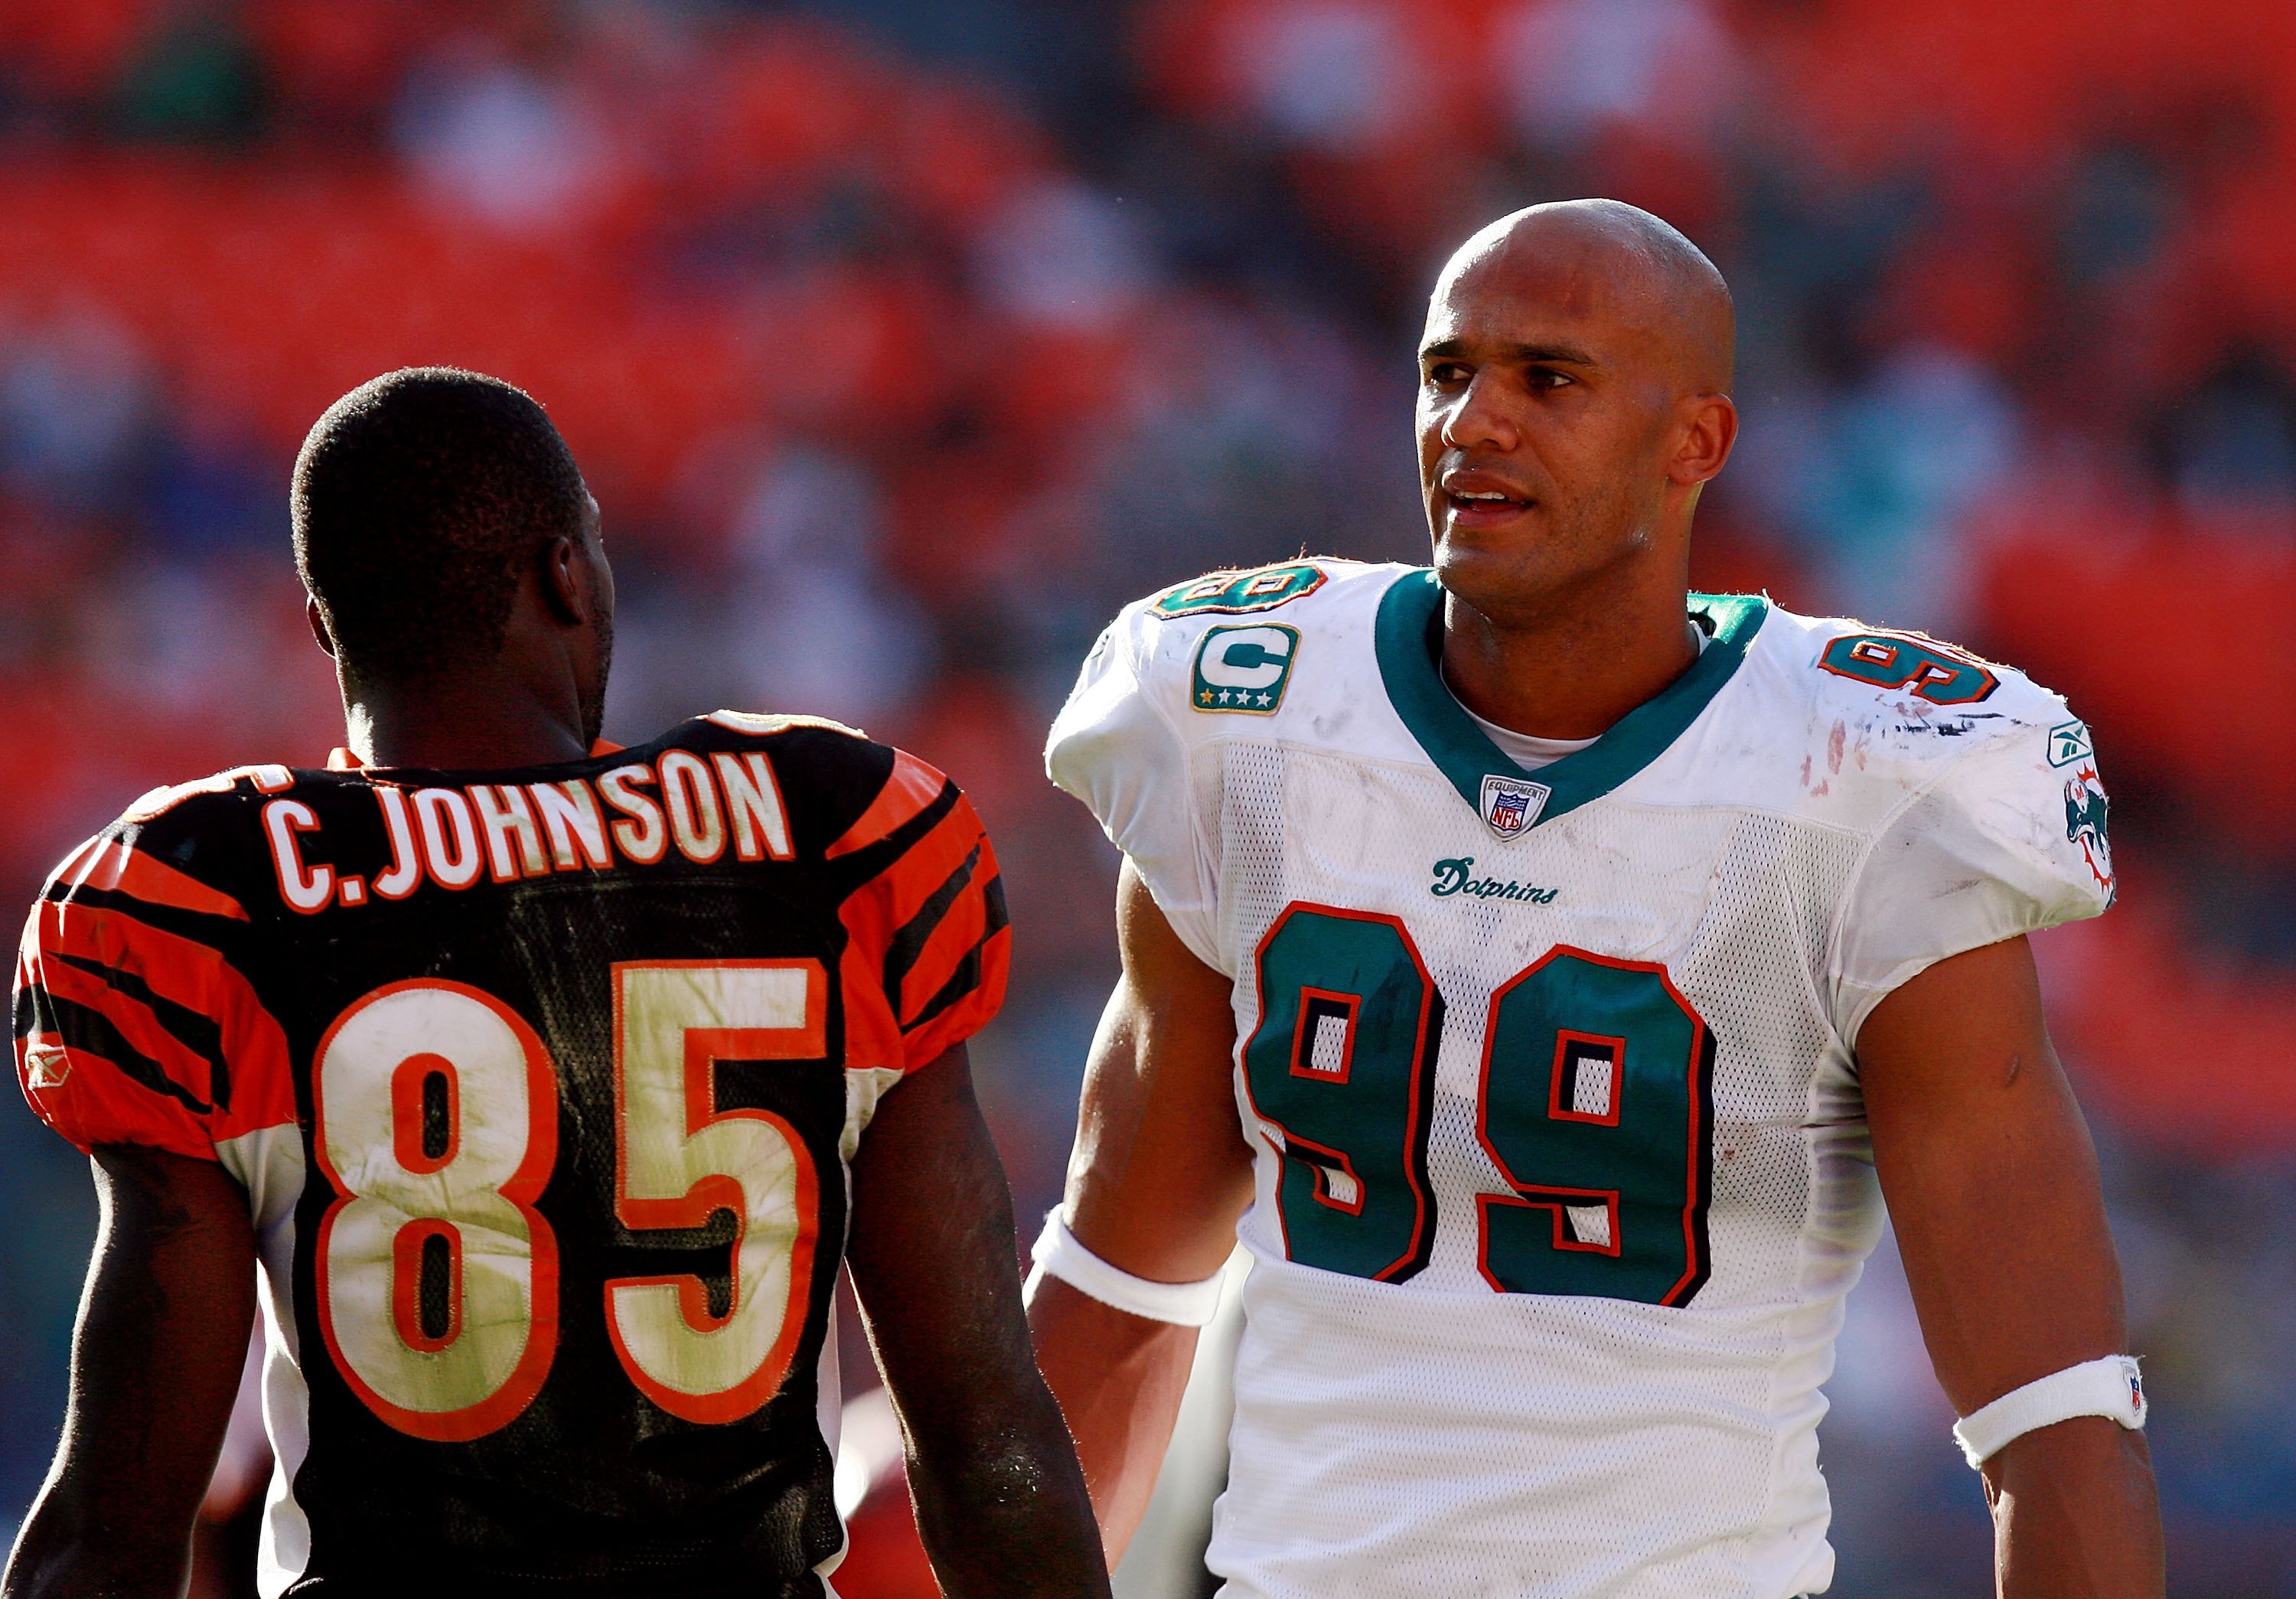 MIAMI - DECEMBER 30:  Wide receiver Chad Johnson #85 of the Cincinnati Bengals talks with defensive end Jason Taylor #99 the Miami Dolphins during a stoppage in play at Dolphin Stadium on December 30, 2007 in Miami, Florida. The Bengals defeated the Dolph